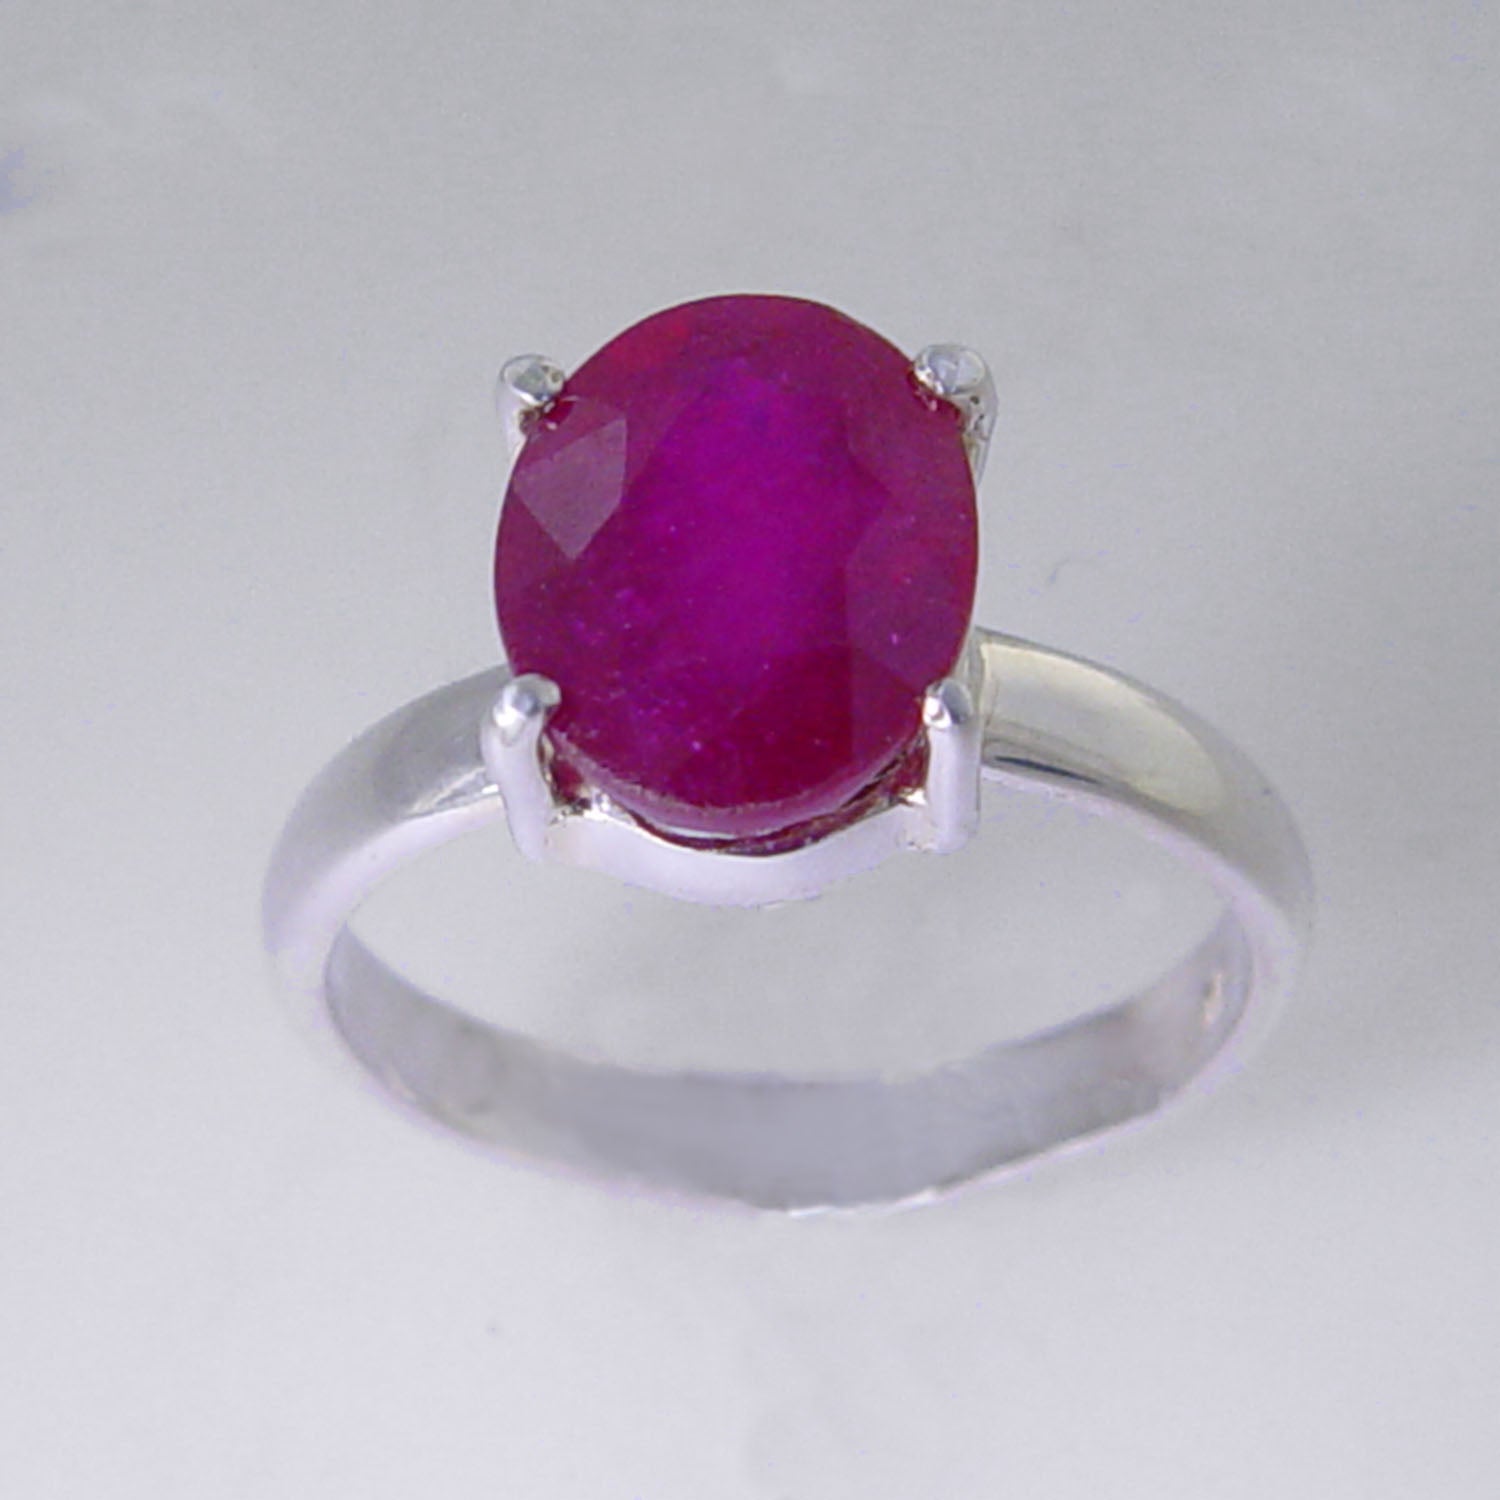 Ruby 4.1 ct Faceted Oval Sterling Silver Ring, Size 6.5